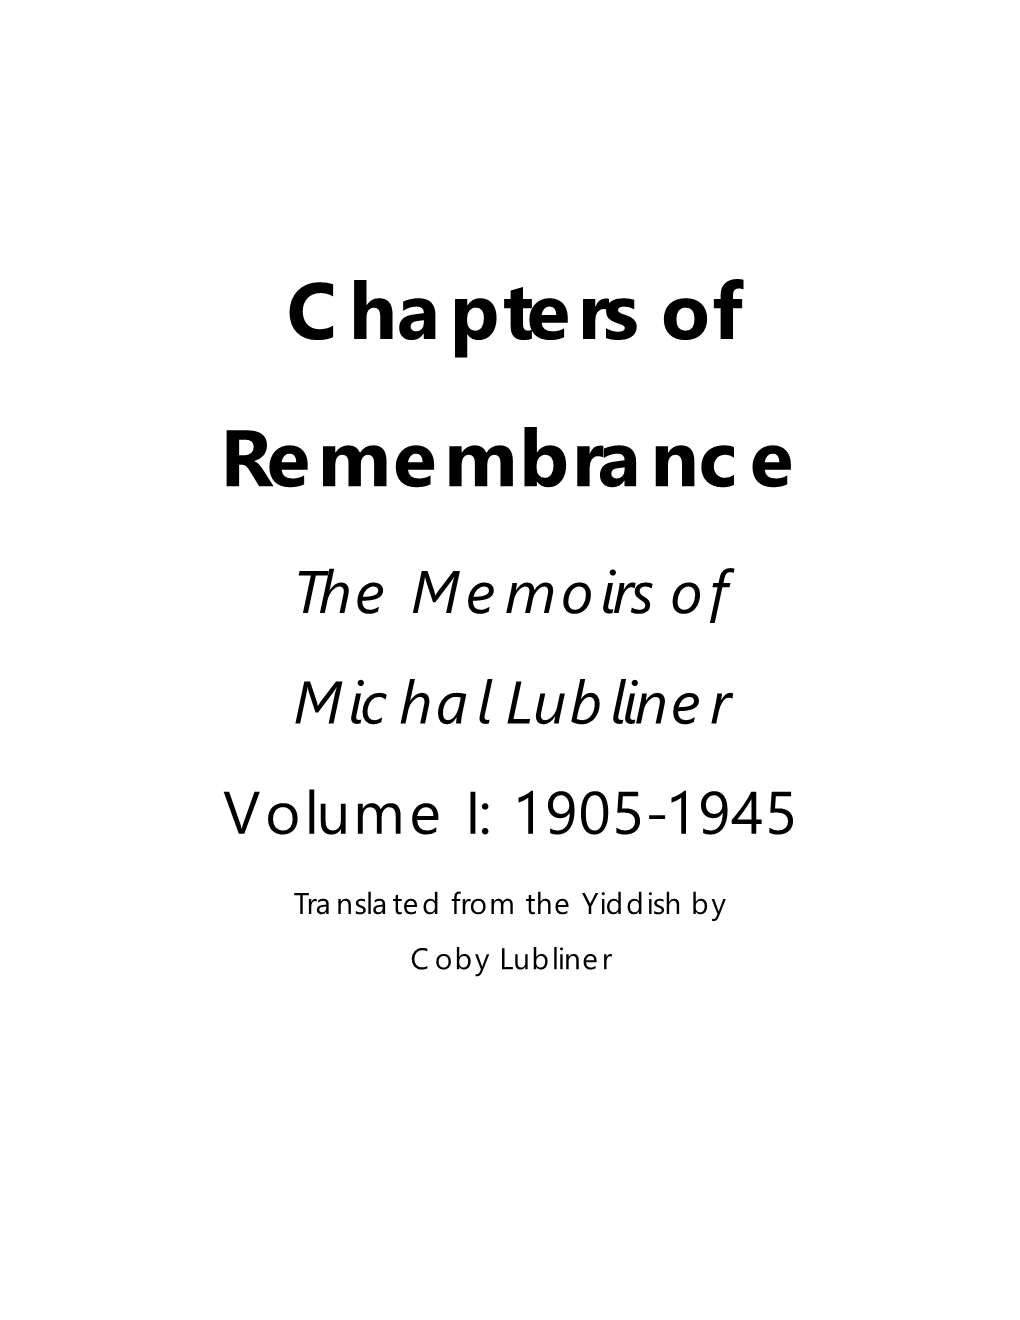 Chapters of Remembrance